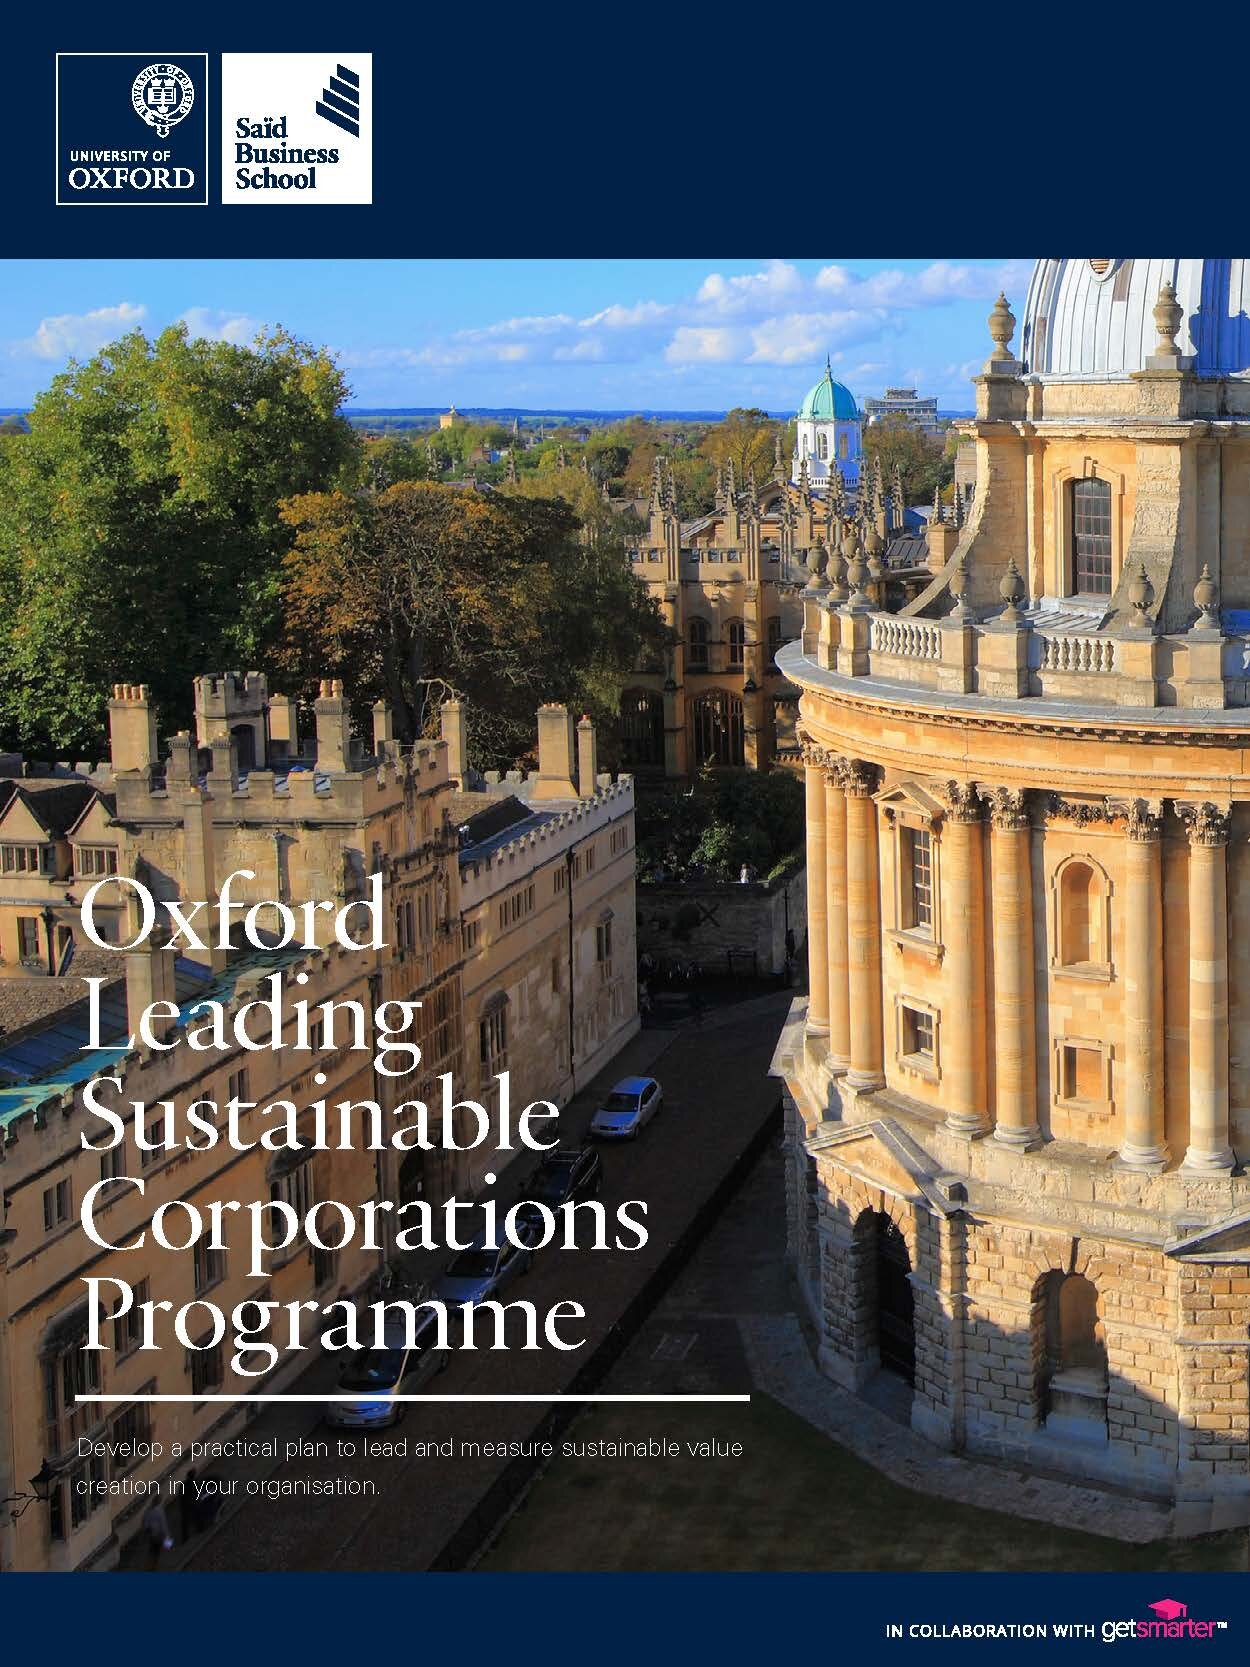 oxford-leading-sustainable-corporations-programme-prospectus_Page_01.jpg